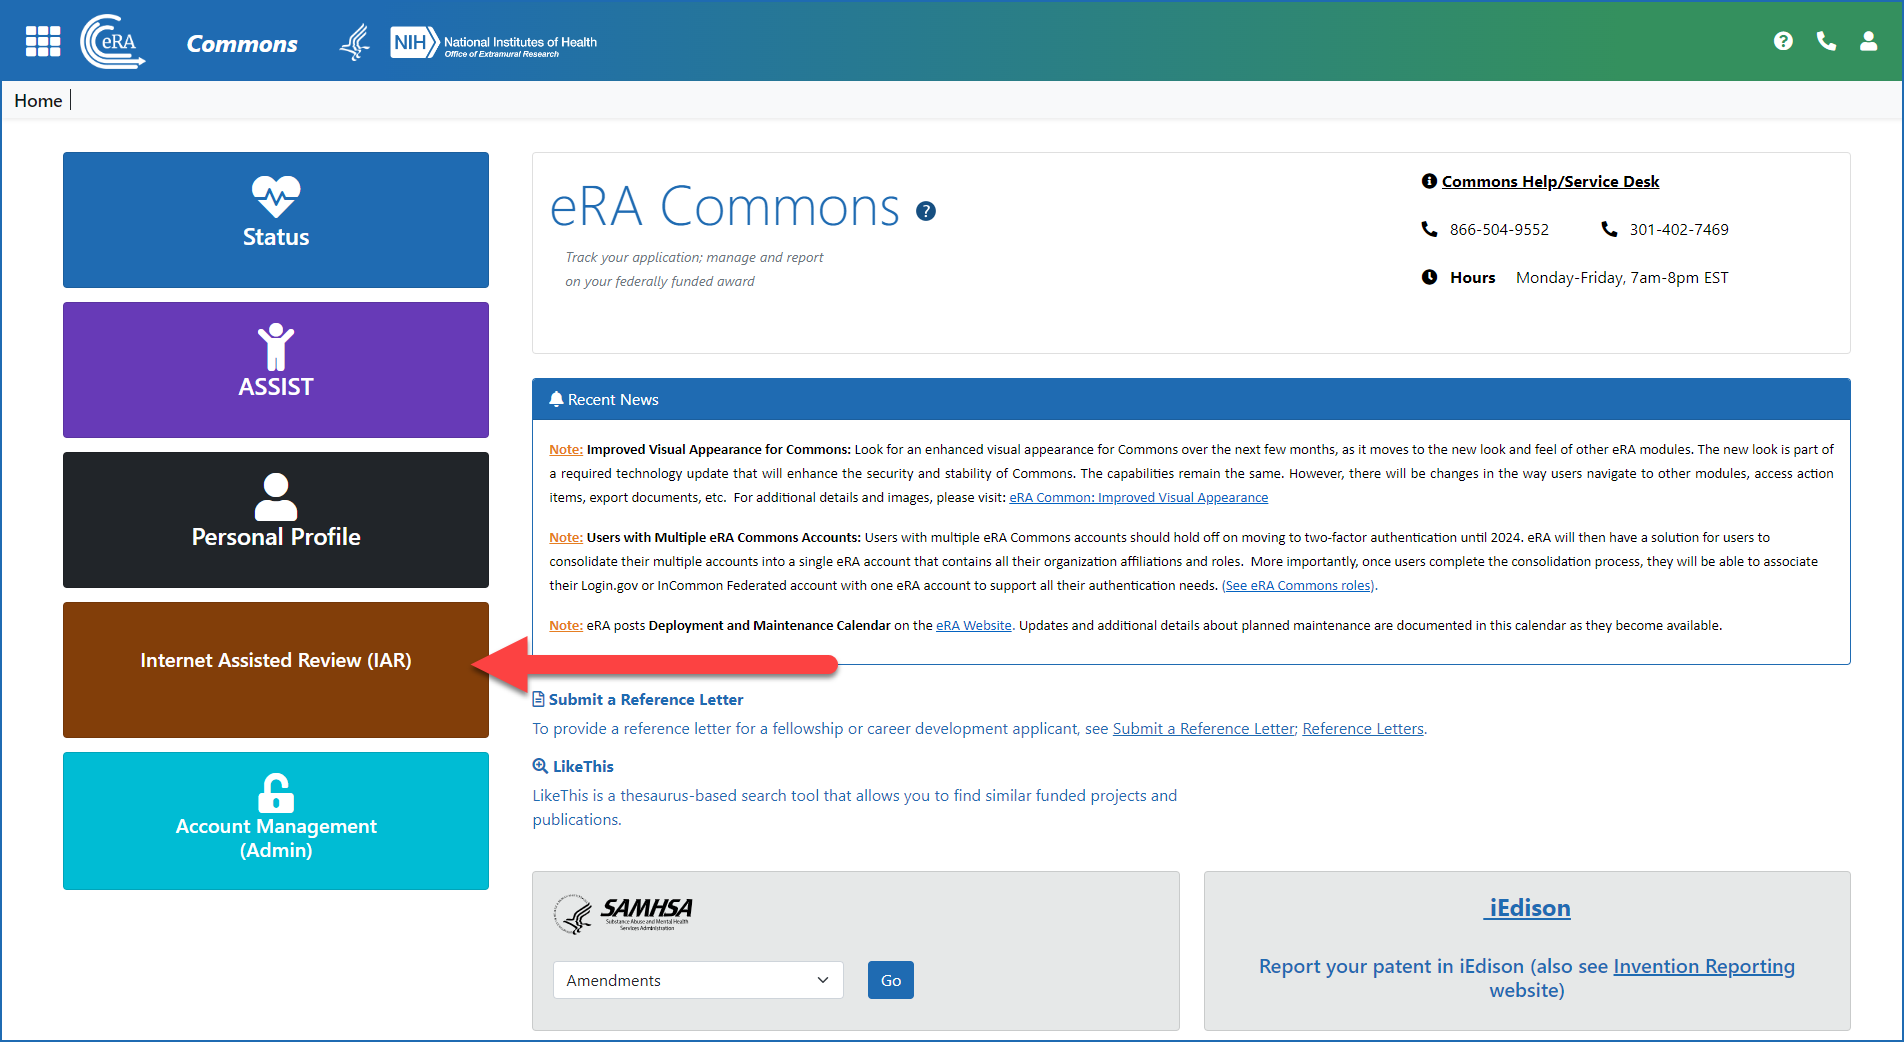 IAR navigation button from eRA Commons landing page